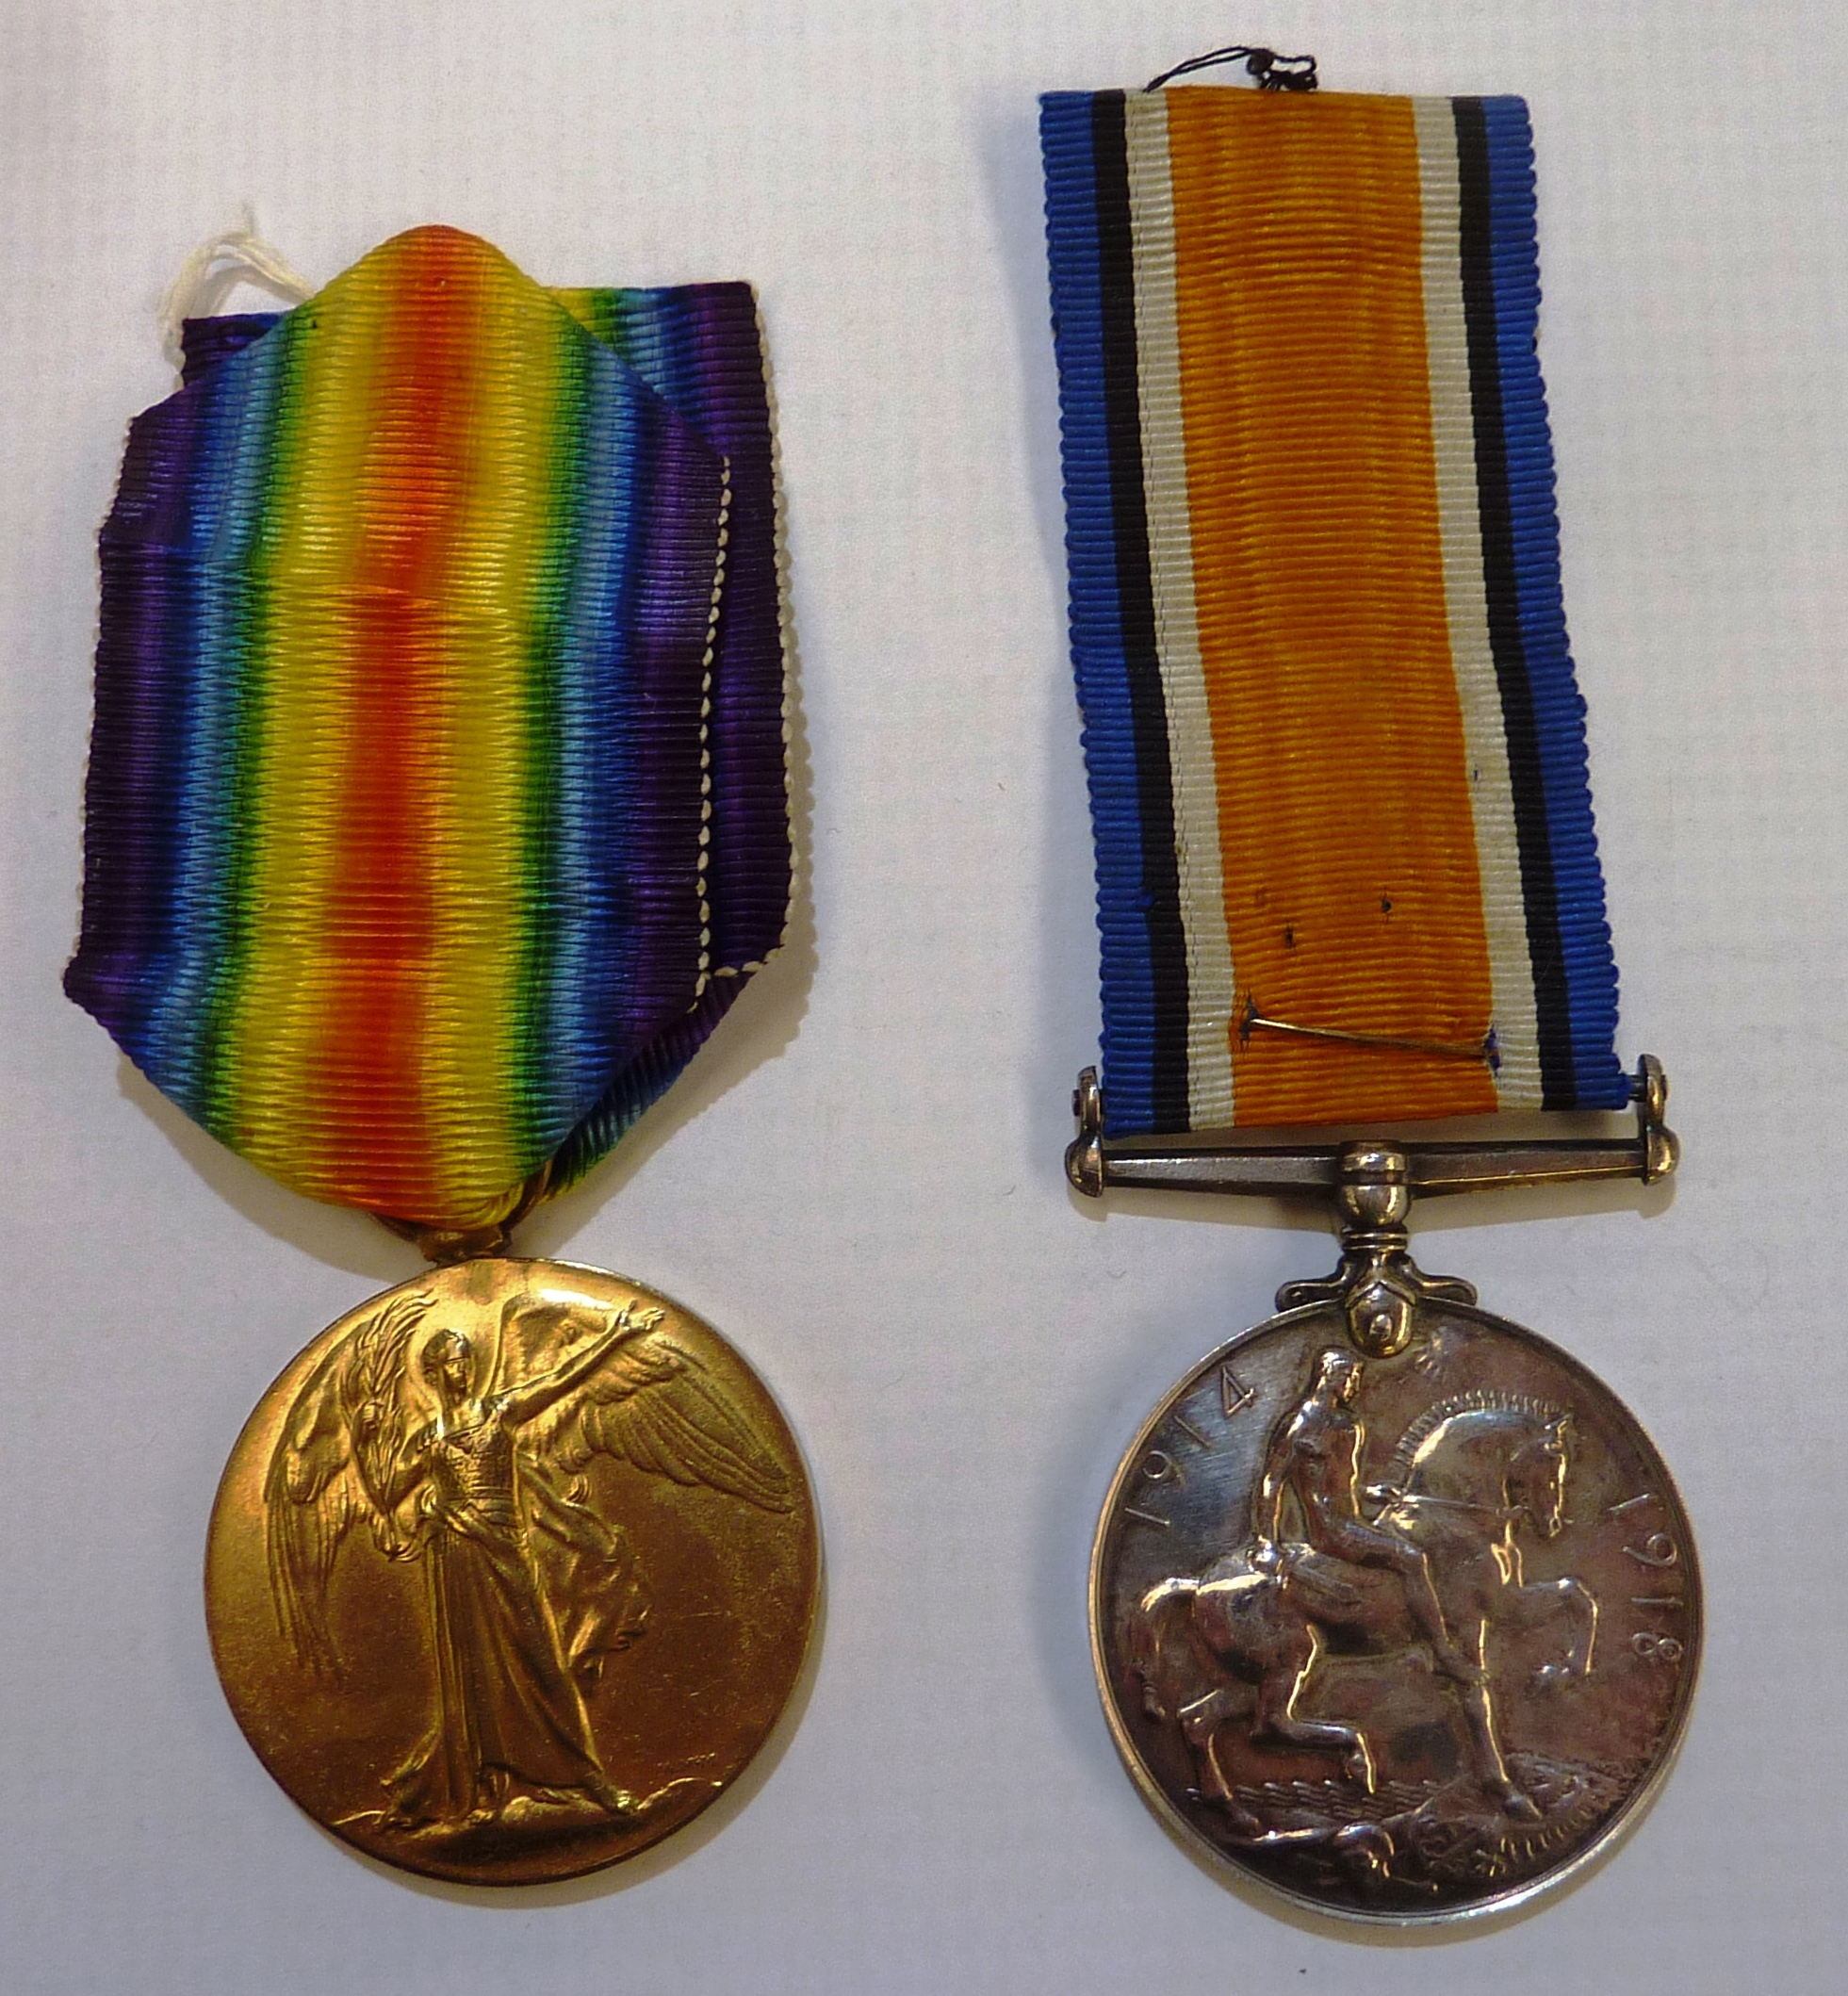 WWI pair comprising of British war medal and victory medal awarded to '70321 PTE.N.R.